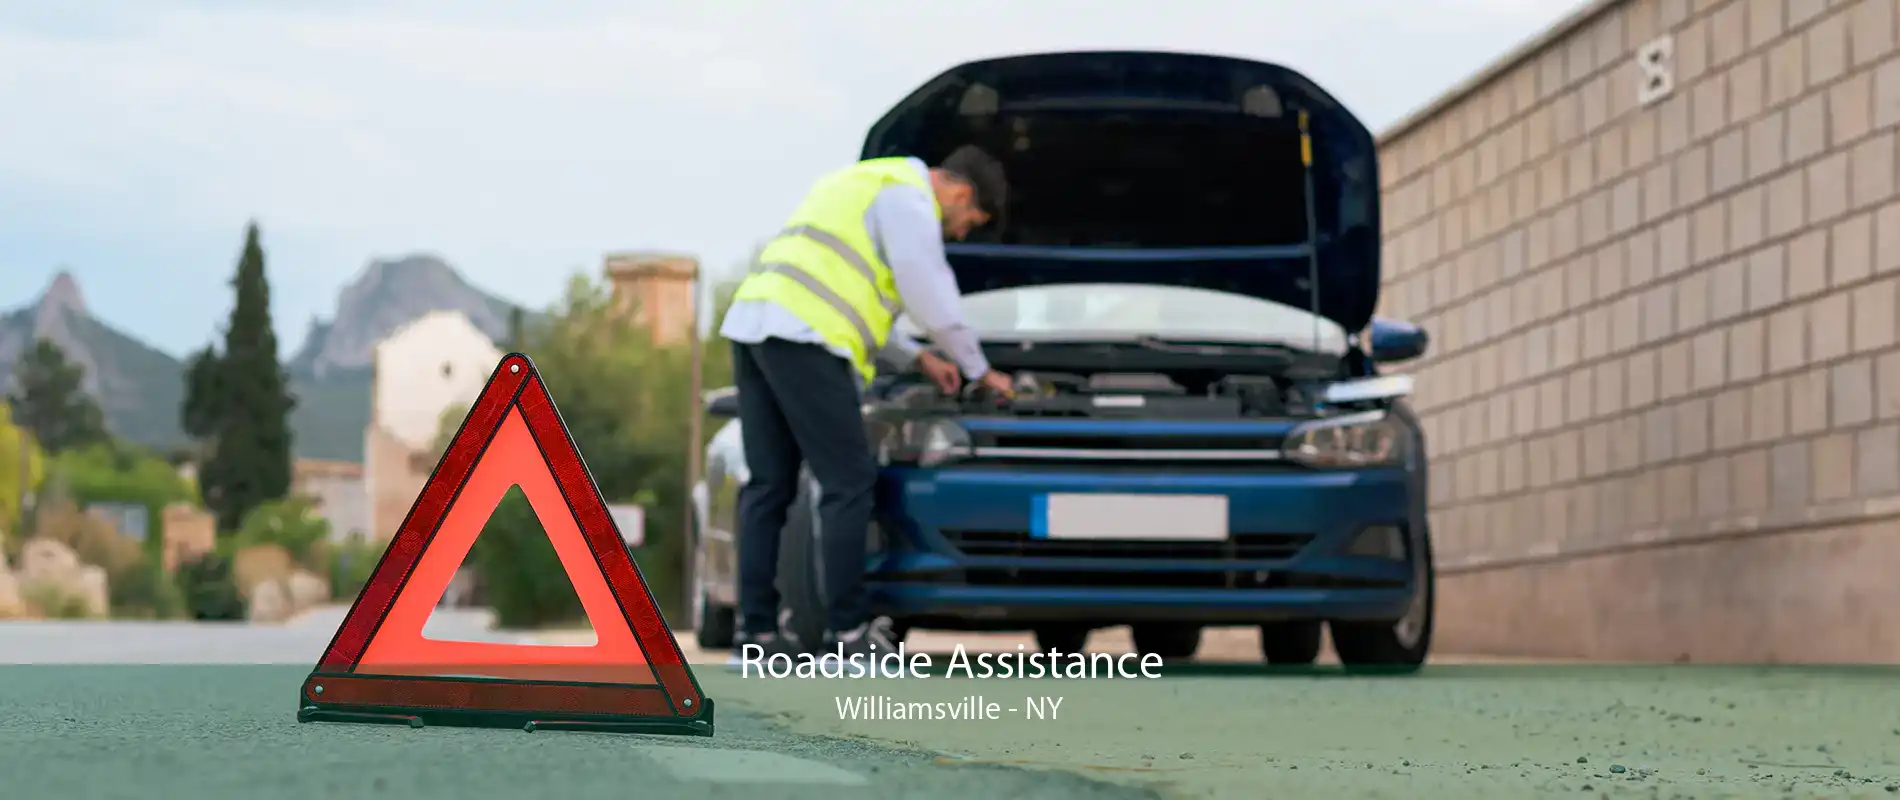 Roadside Assistance Williamsville - NY